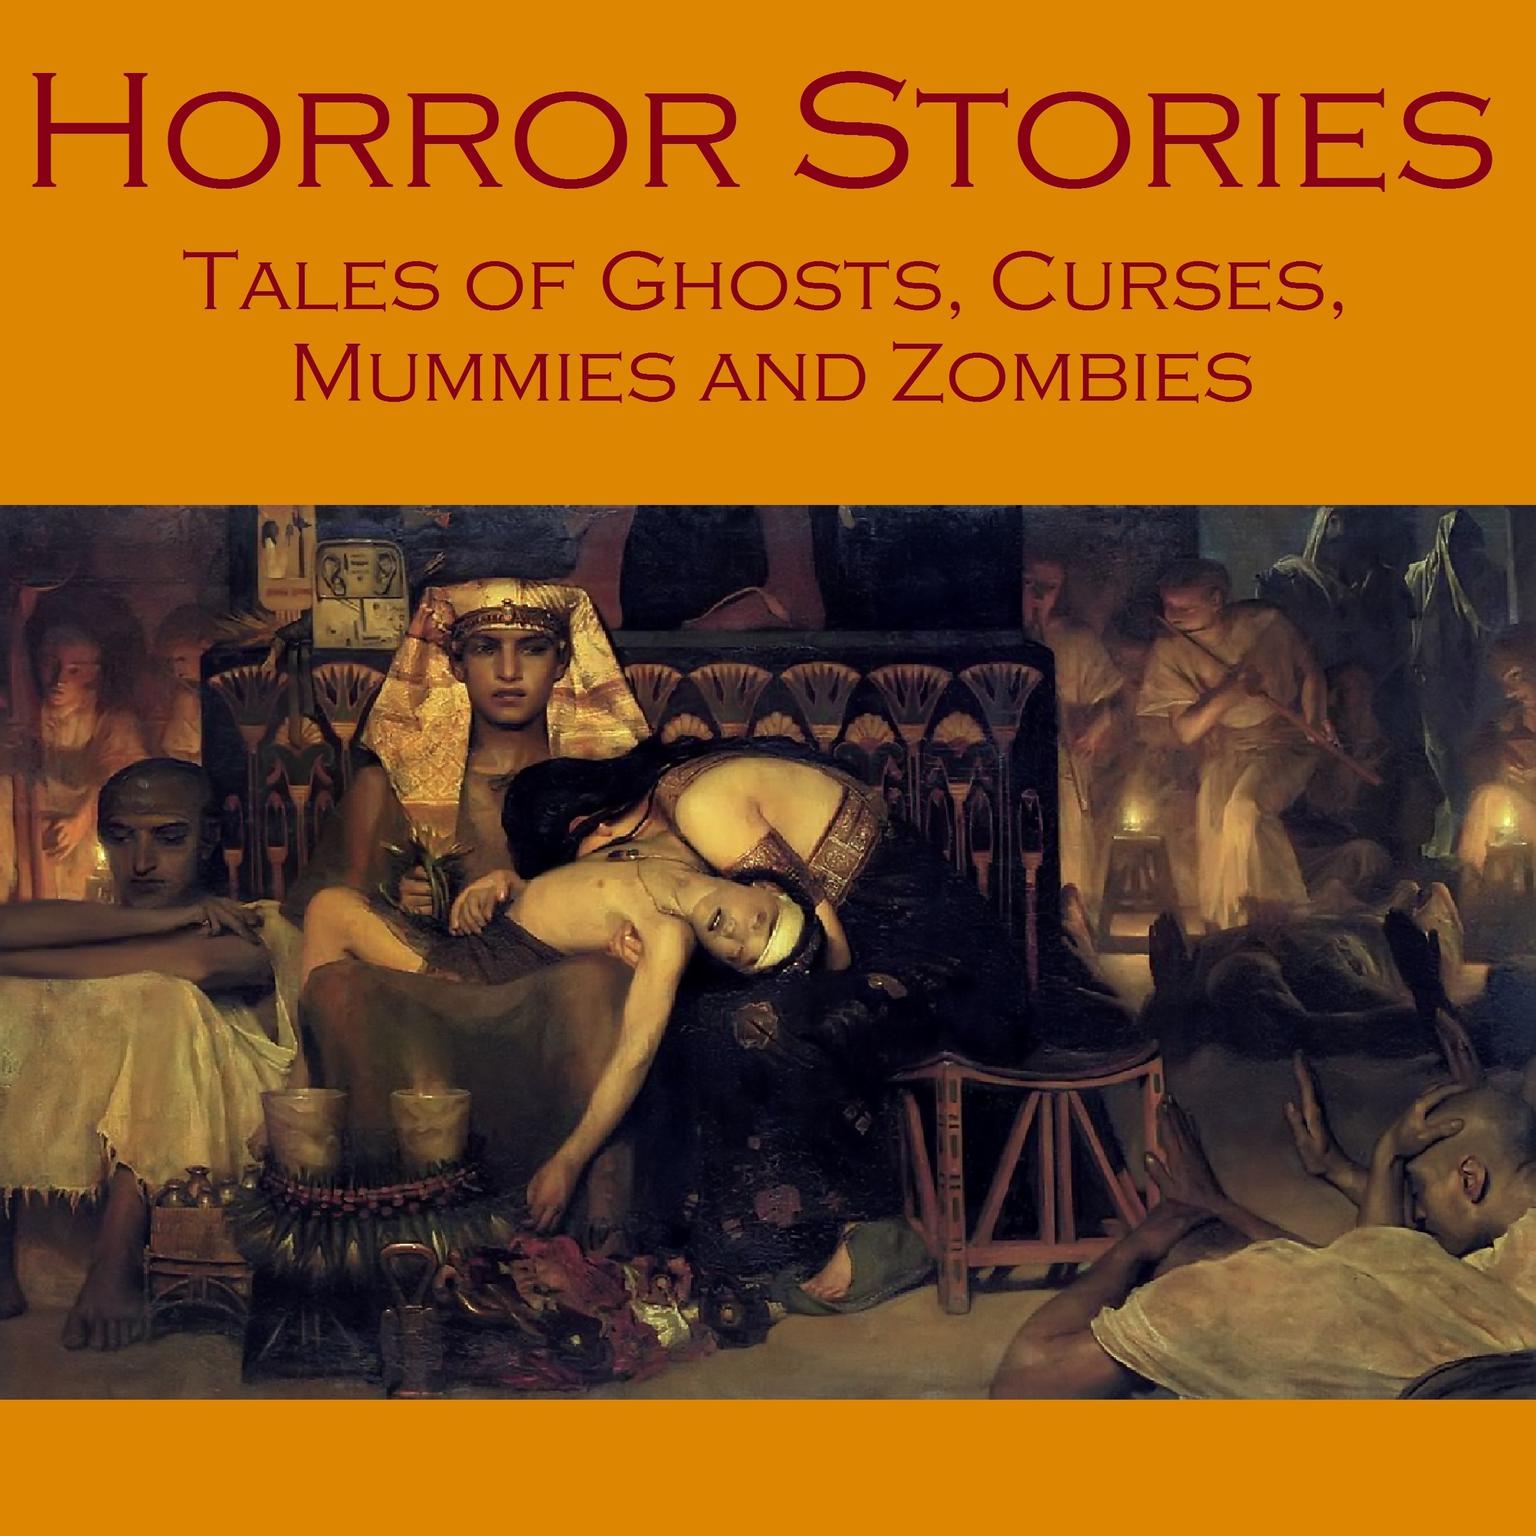 Horror Stories: Tales of Ghosts, Curses, Mummies, and Zombies Audiobook, by various authors